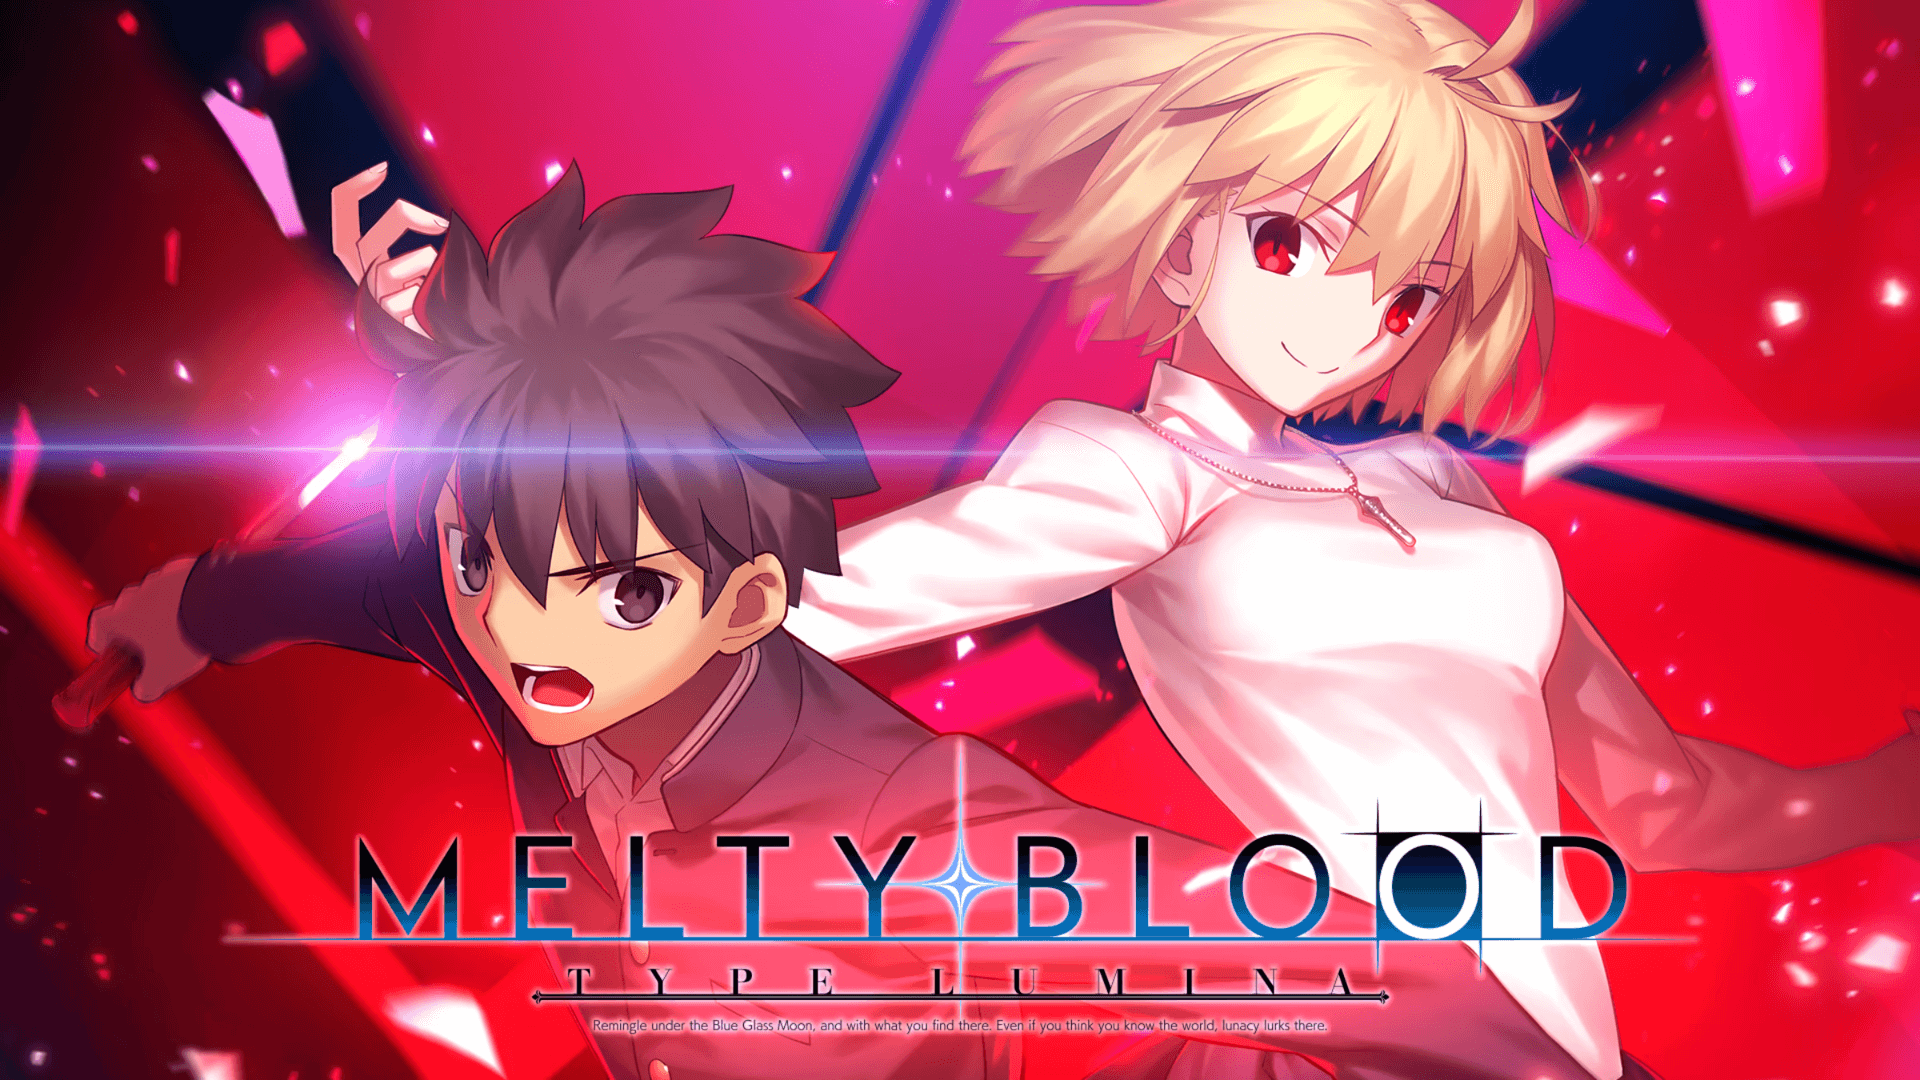 Melty Blood: Type Lumina is Part of July's PlayStation Plus lineup